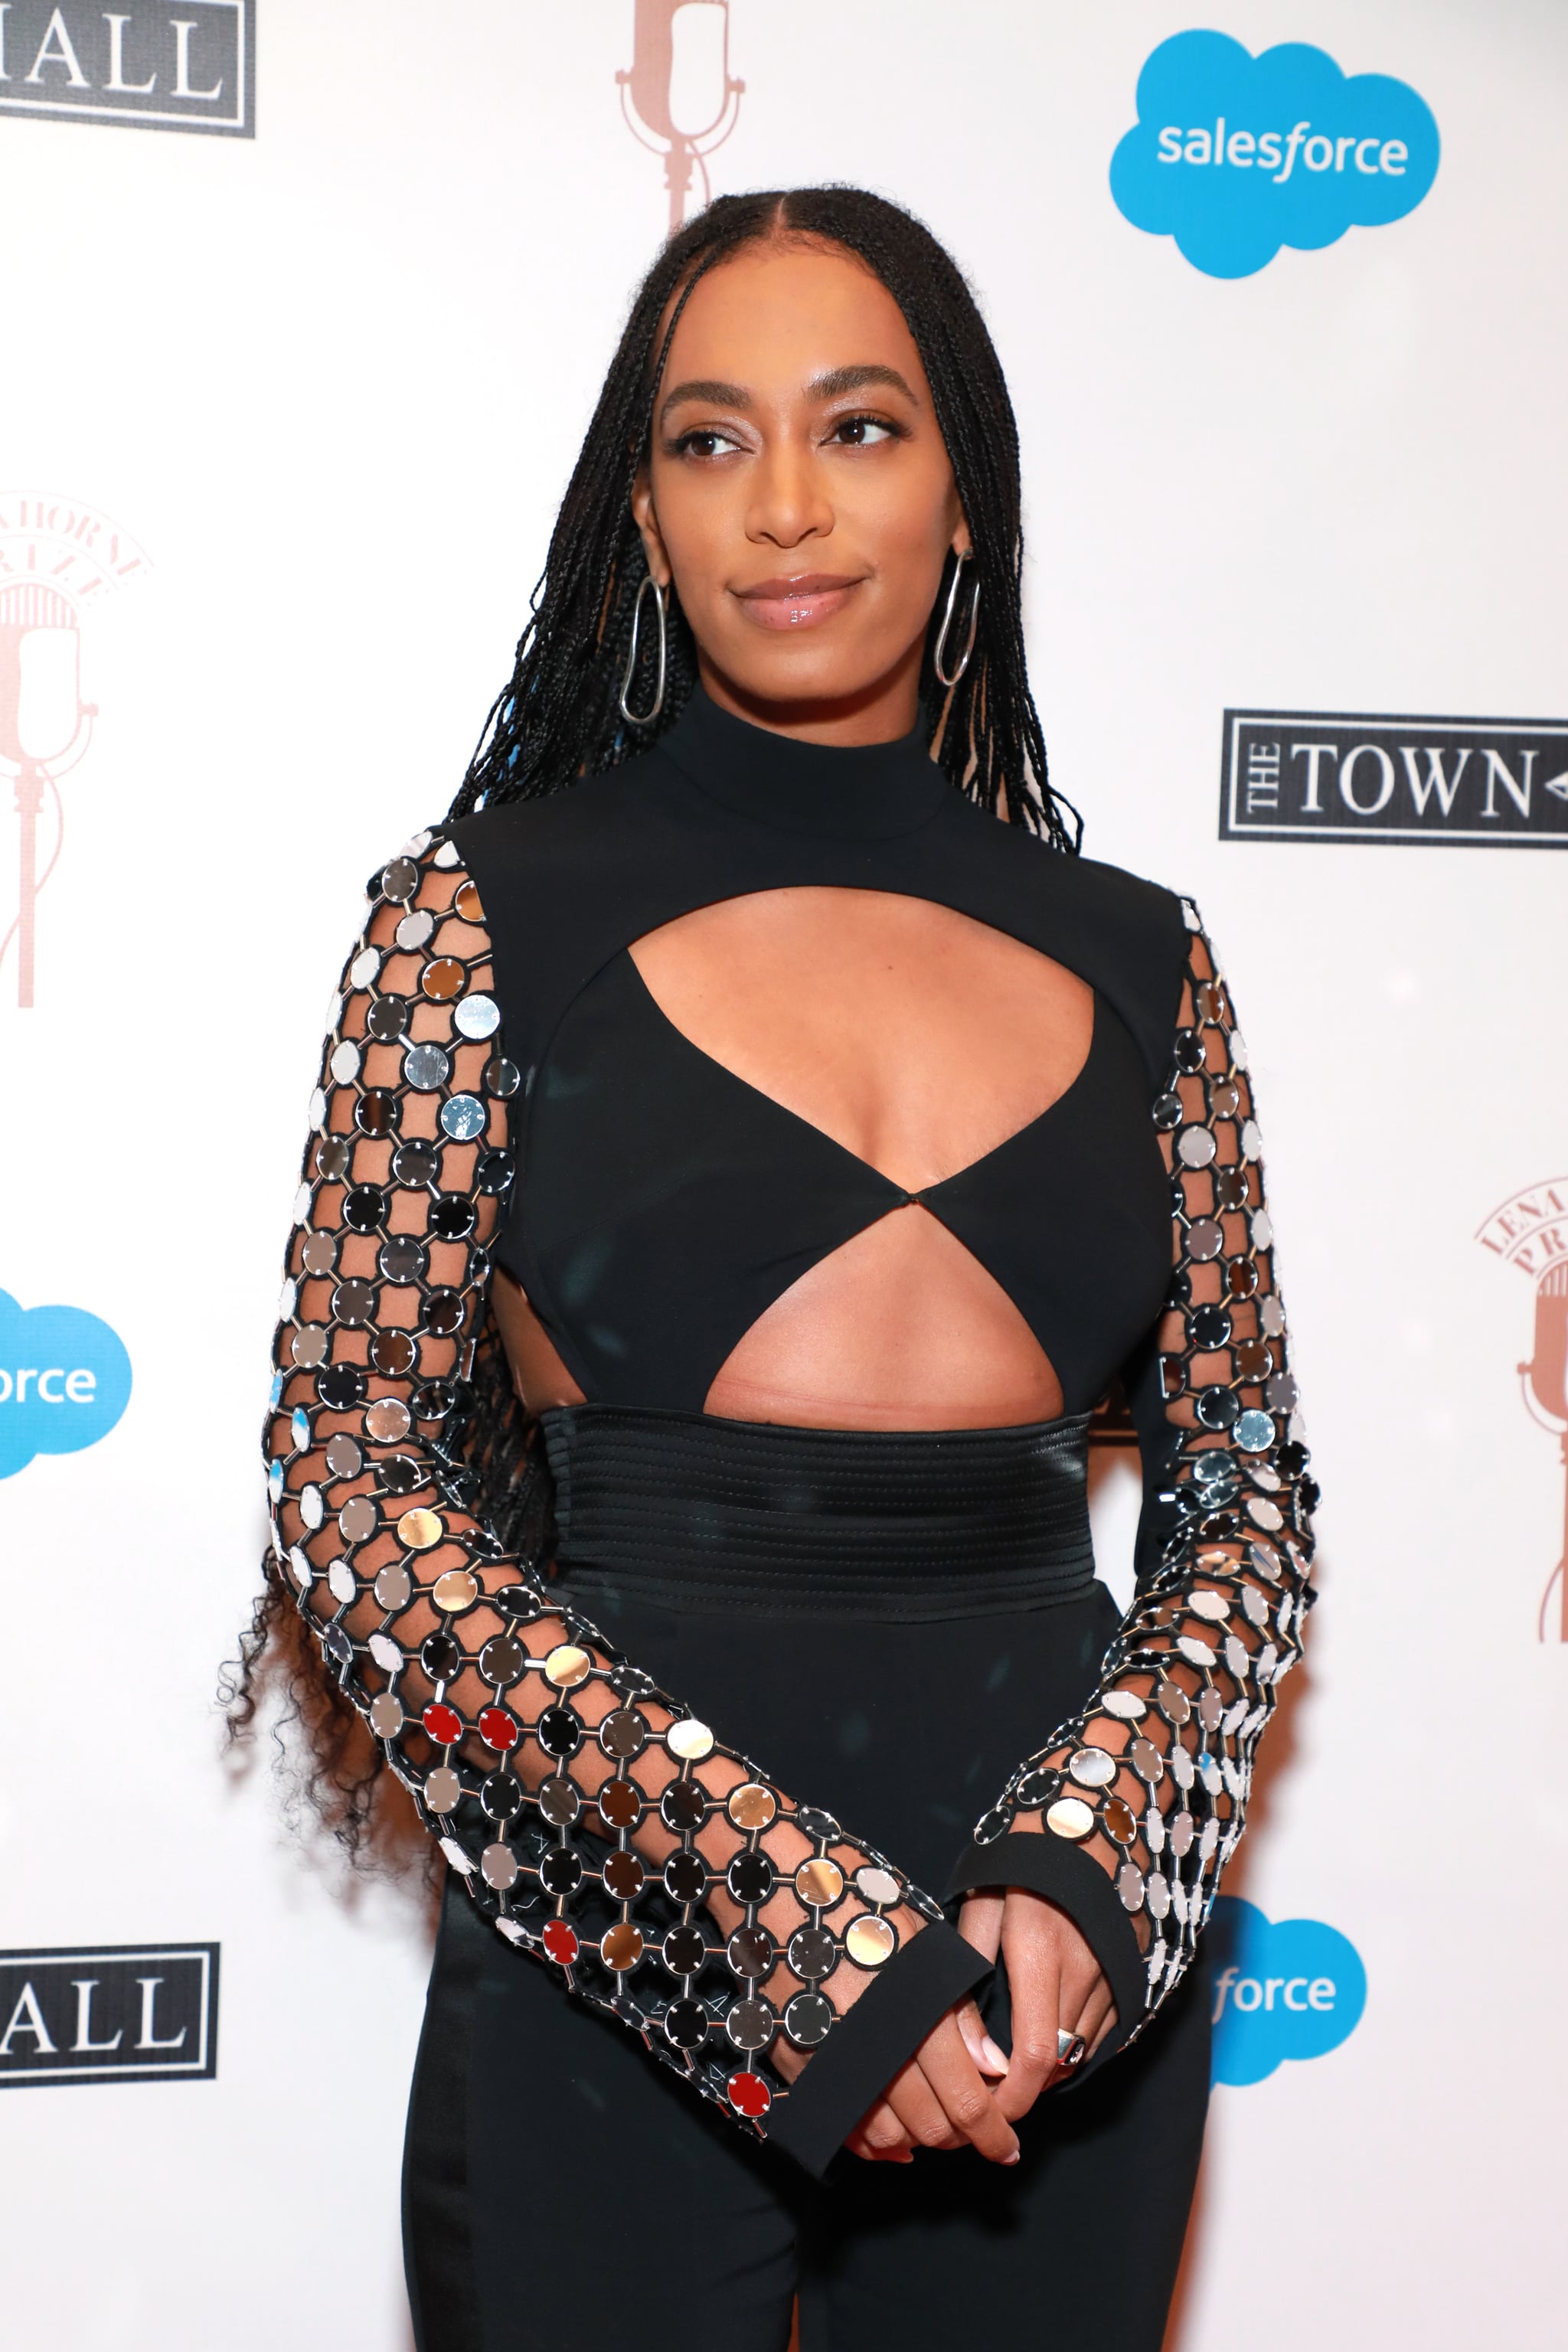 NEW YORK, NEW YORK - FEBRUARY 28: Solange Knowles attends the Lena Horne Prize Event Honouring Solange Knowles Presented by Salesforce at the Town Hall on February 28, 2020 in New York City. (Photo by Jason Mendez/Getty Images for The Town Hall)